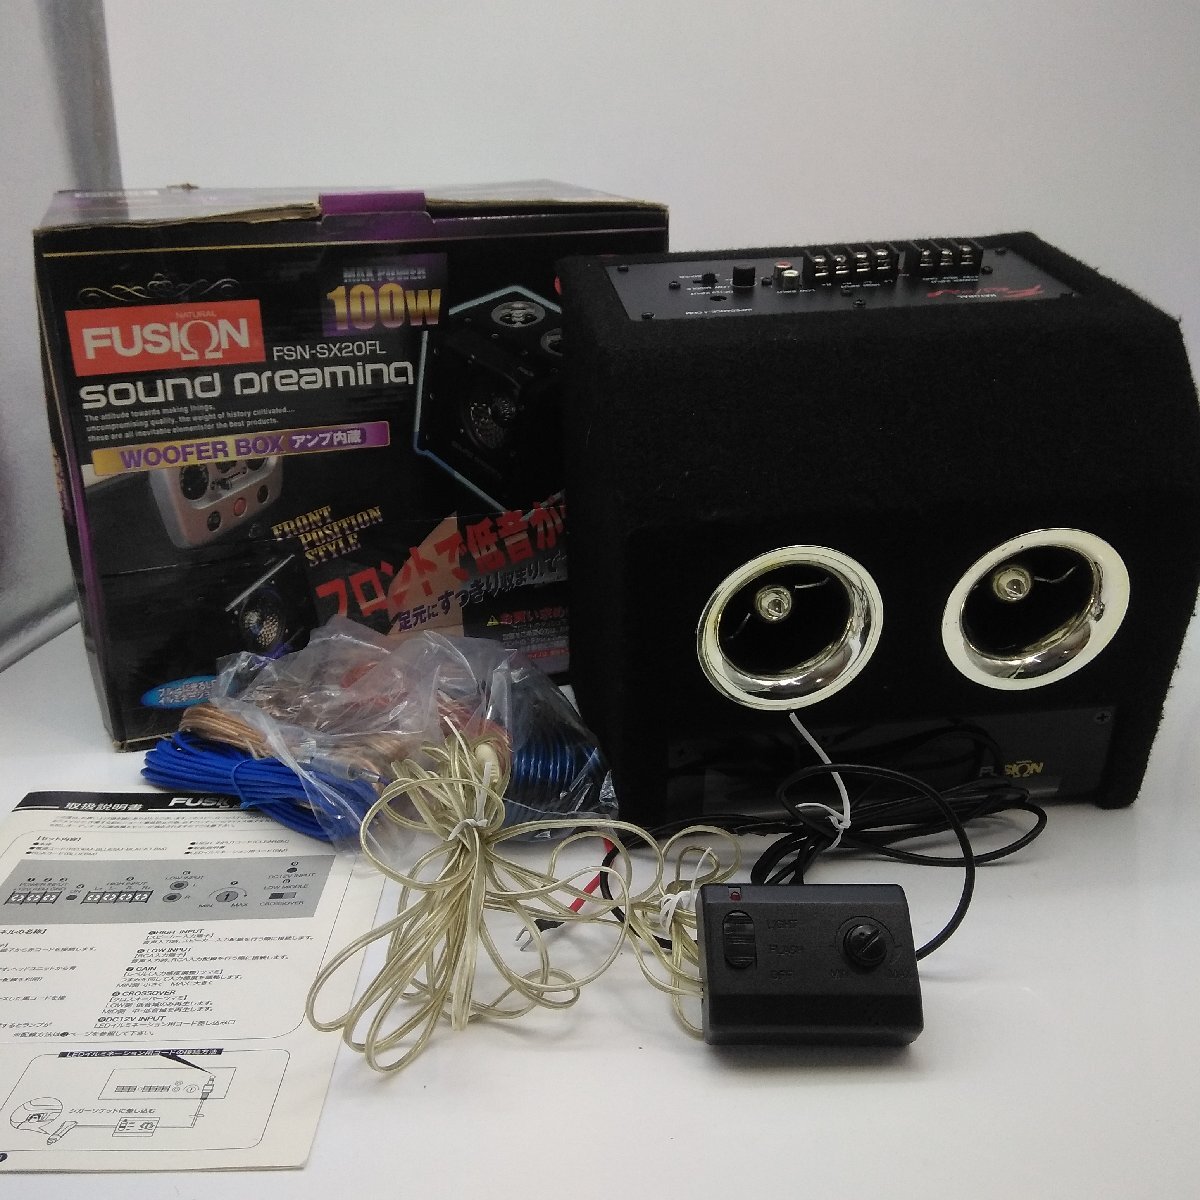 FUSION speaker subwoofer box type put type FSN-SX20FL car amplifier built-in LED attaching WOOFER BOX FRONT POSITION STYLE instructions attaching 